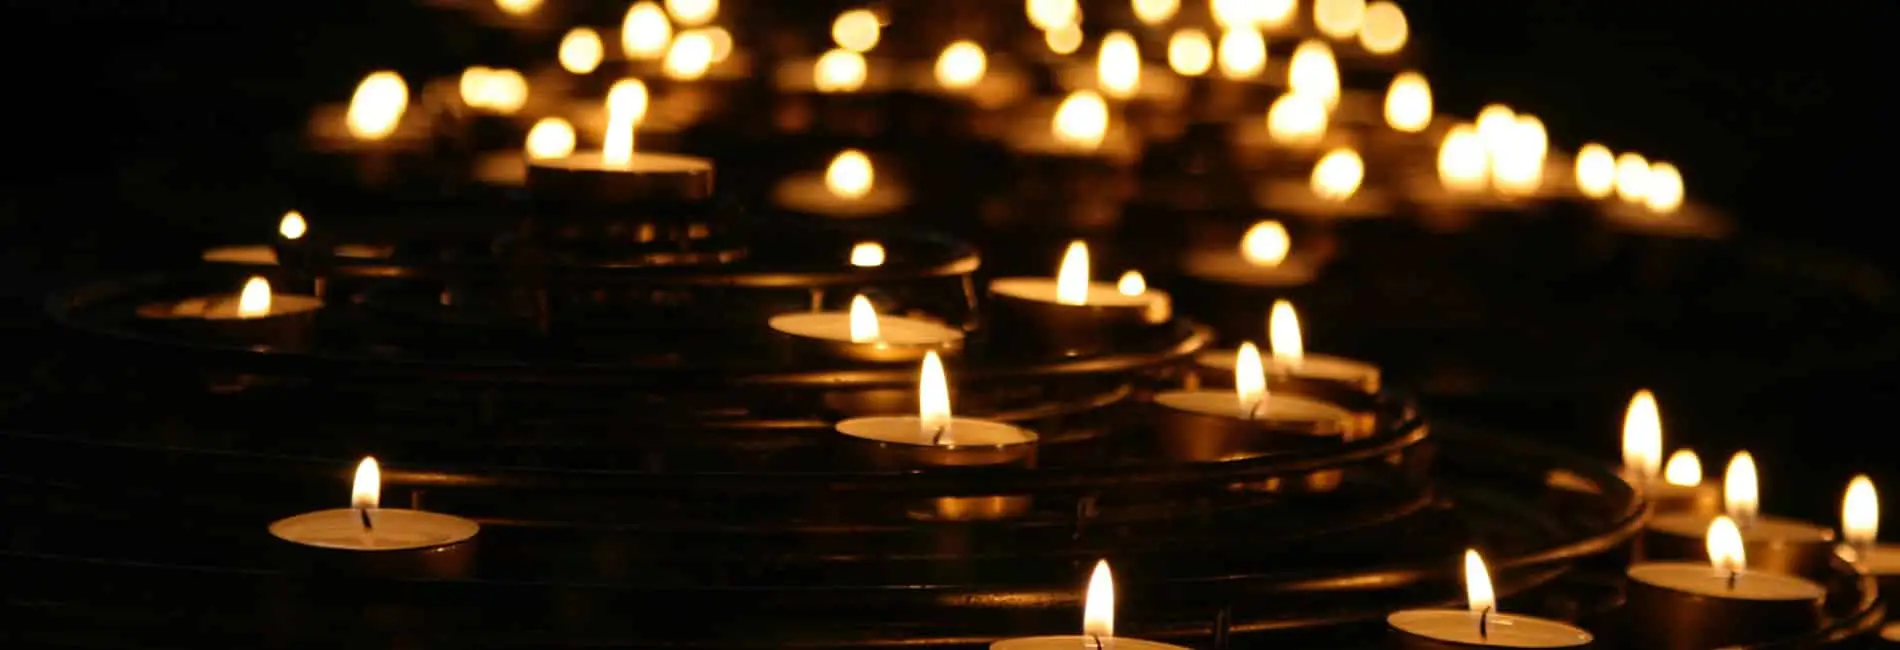 A number of candles illustrating Teen Grief and Loss Treatment | ThreePeaks Ascent, a short-term residential treatment center for teens and their families